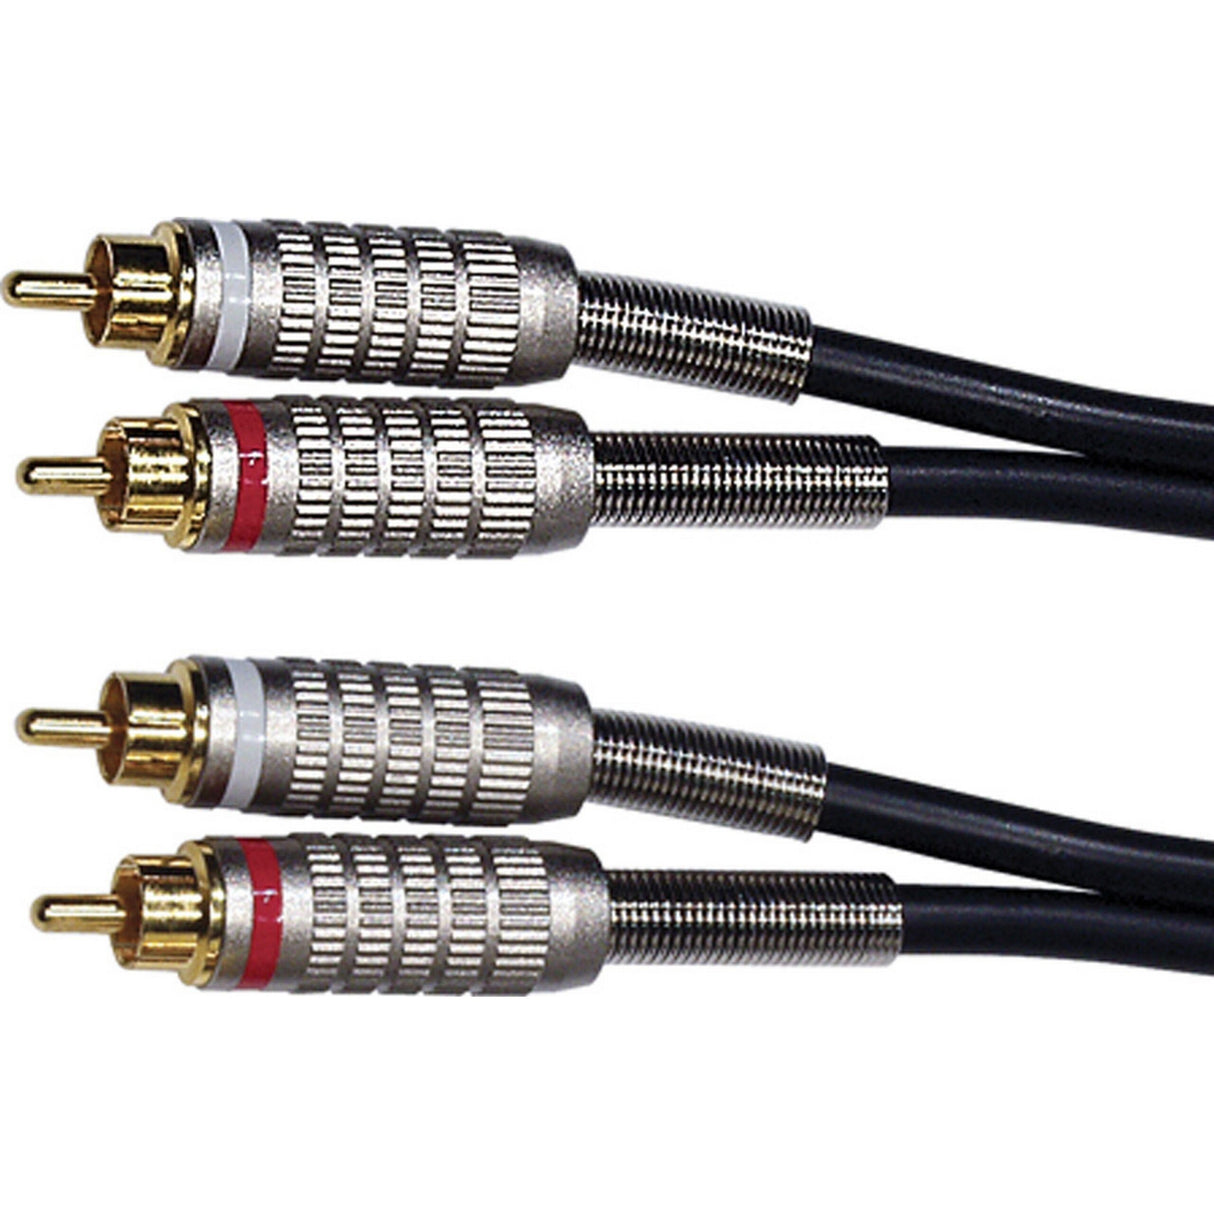 Connectronics Premium Stereo RCA Audio Cable, 3 Foot